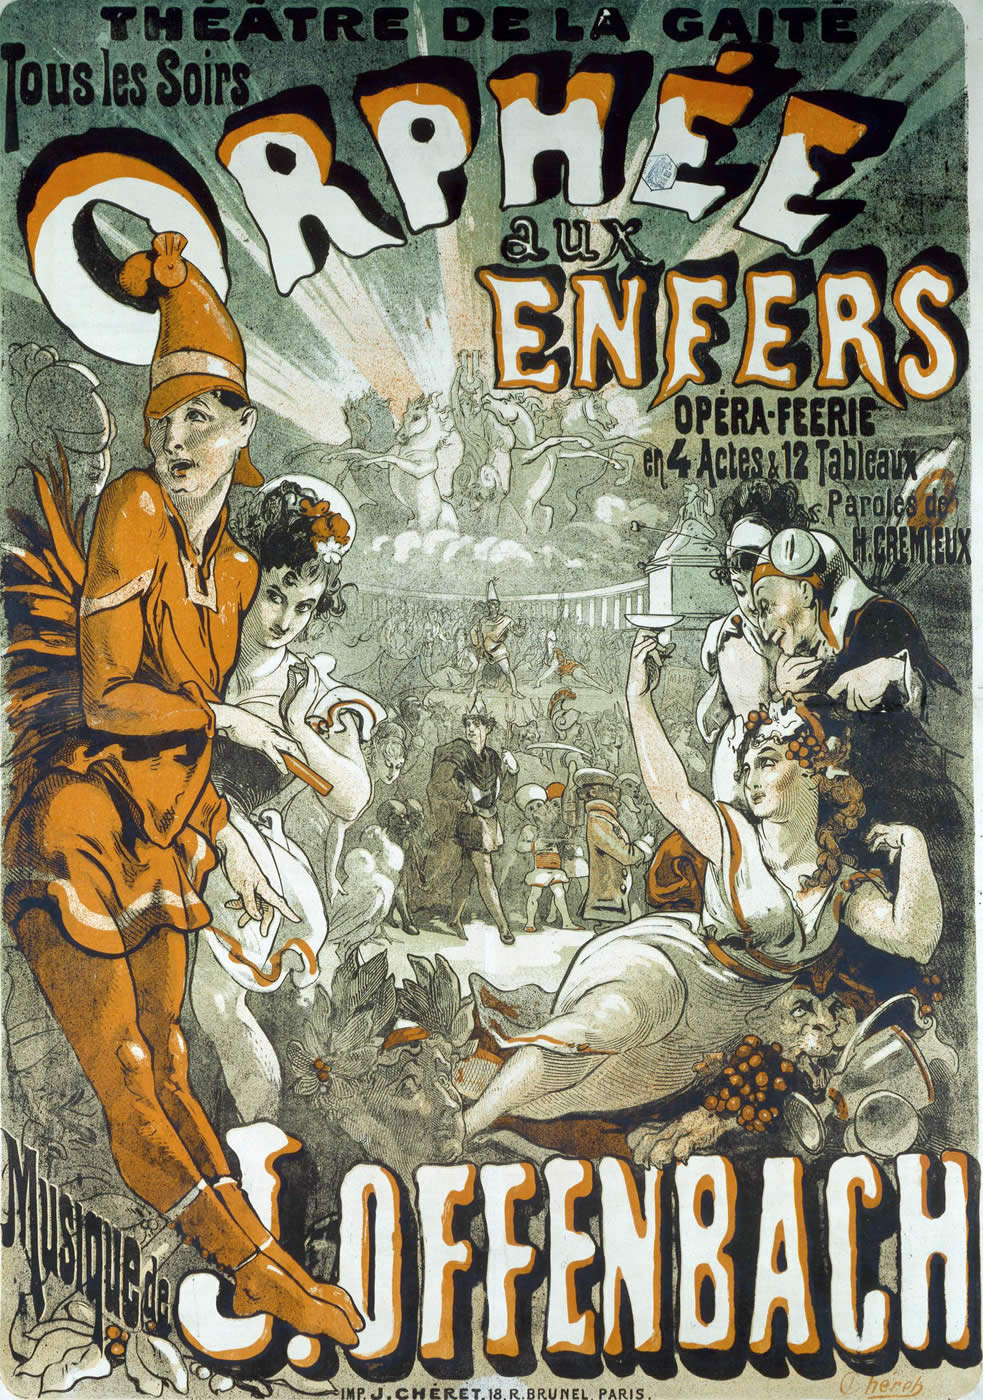 Jules Chere. The playbill for the operetta "Orpheus in the underworld" by Jacques Offenbach